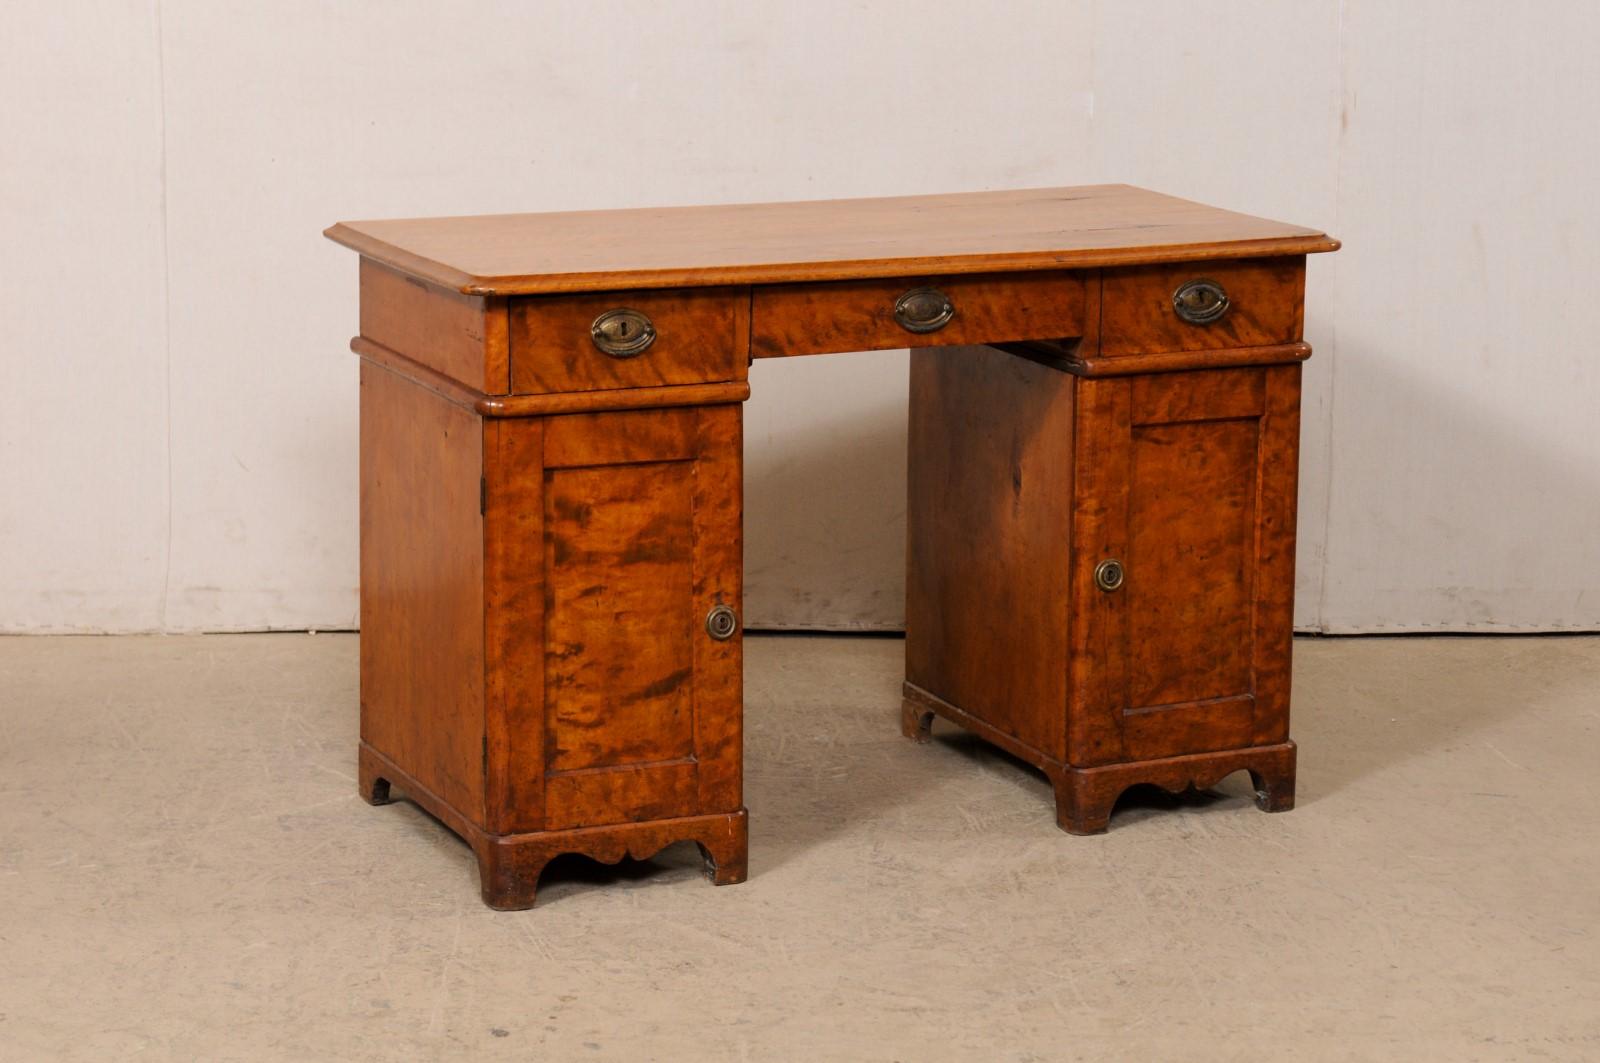 A Swedish pedestal curly birch desk, circa 1820-40. This antique desk from Sweden features a four foot long, rectangular-shaped top which overhangs the apron below that houses three drawers set horizontally at its underside, and resting upon on a